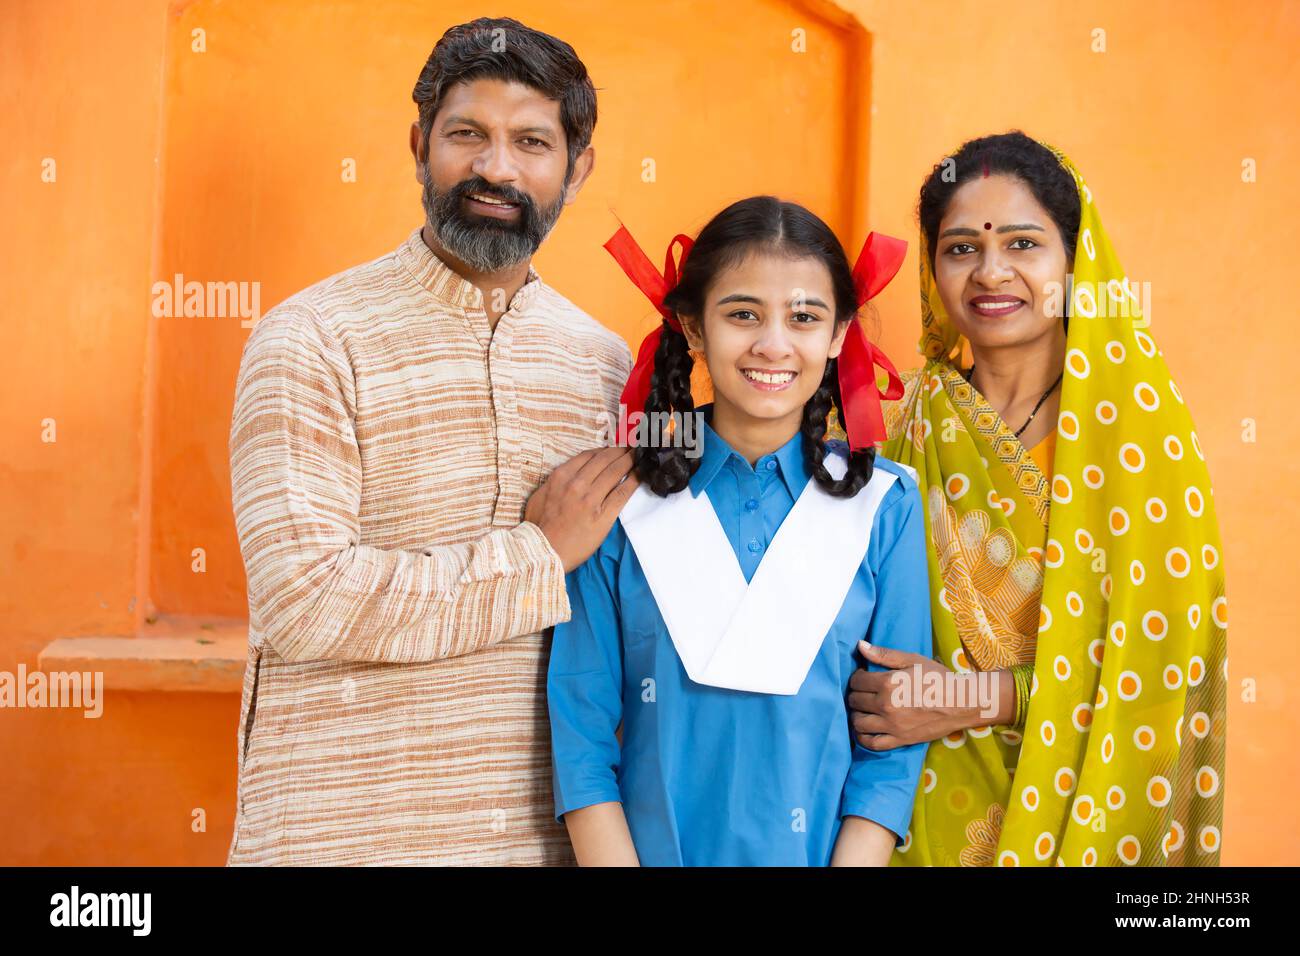 Portrait of happy rural Indian family, young girl in school uniform with her parents, Beard man and woman in sari standing with daughter. looking at c Stock Photo